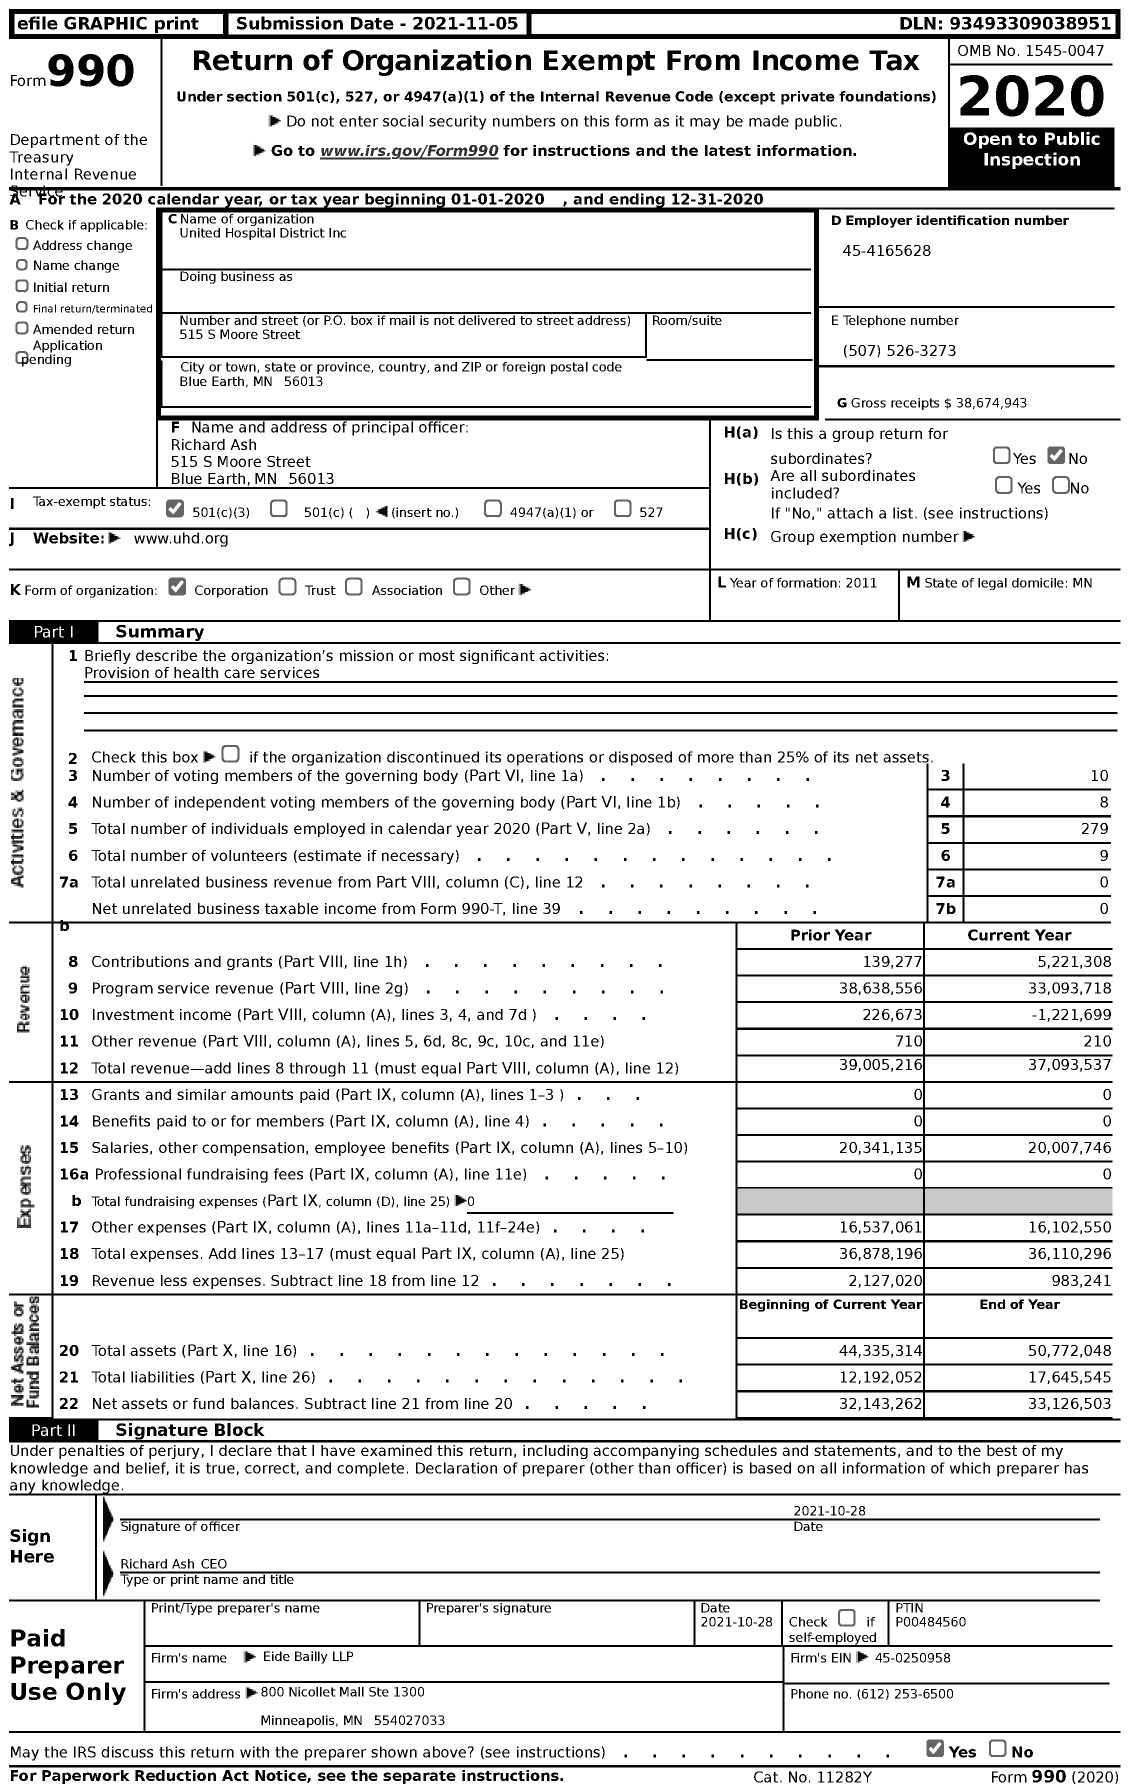 Image of first page of 2020 Form 990 for United Hospital District (UHD)